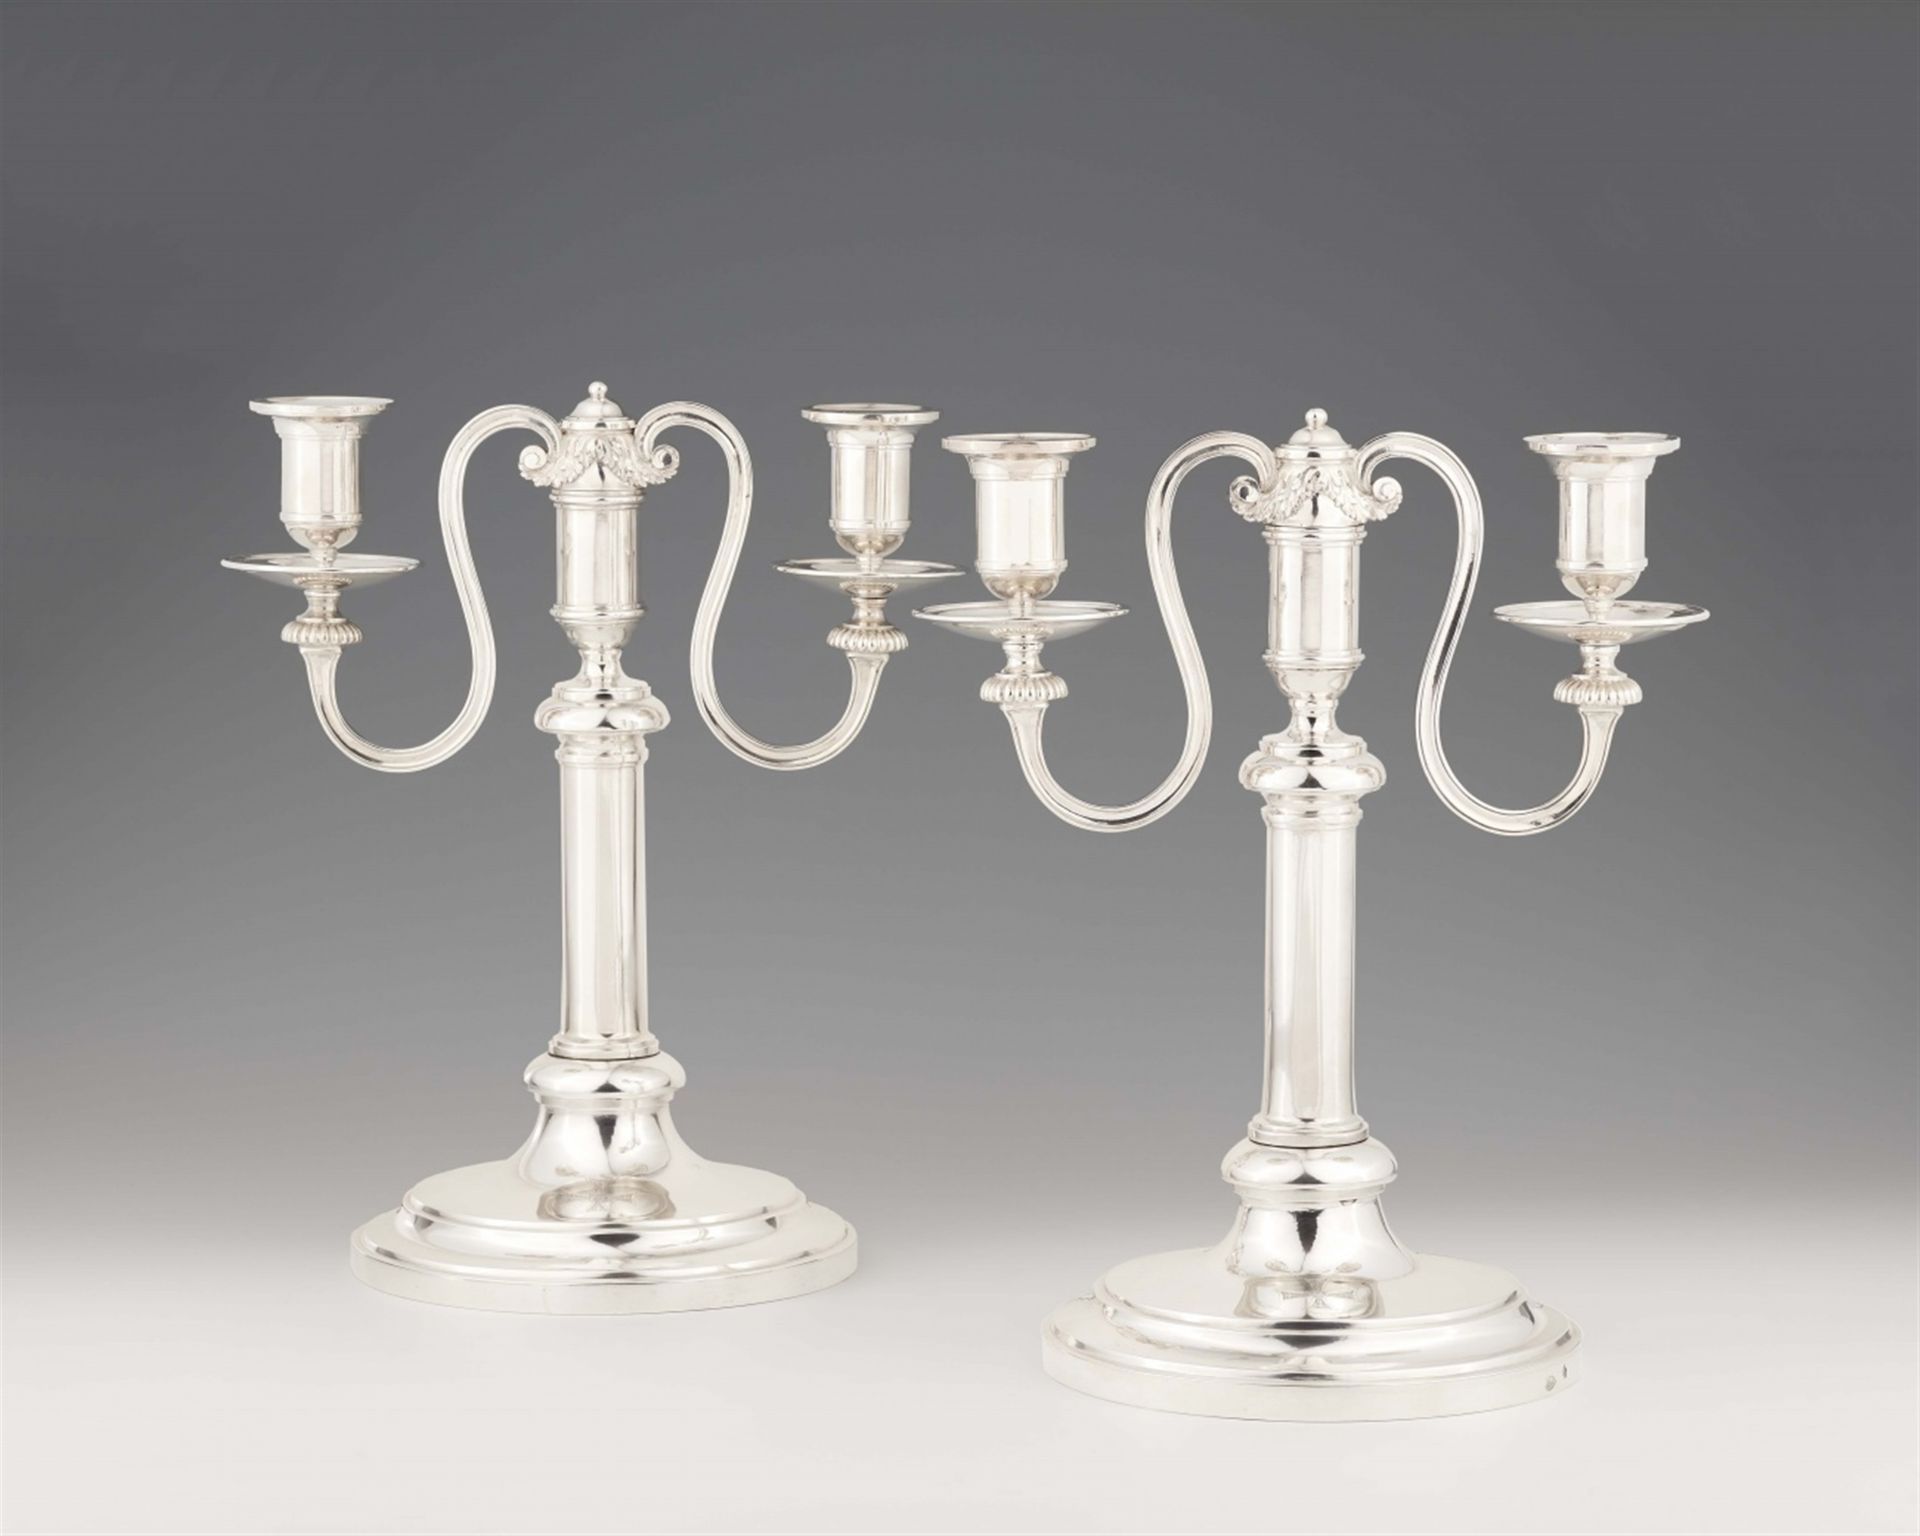 A pair of Bonn silver candelabra made for the Grand Master of the Teutonic Order